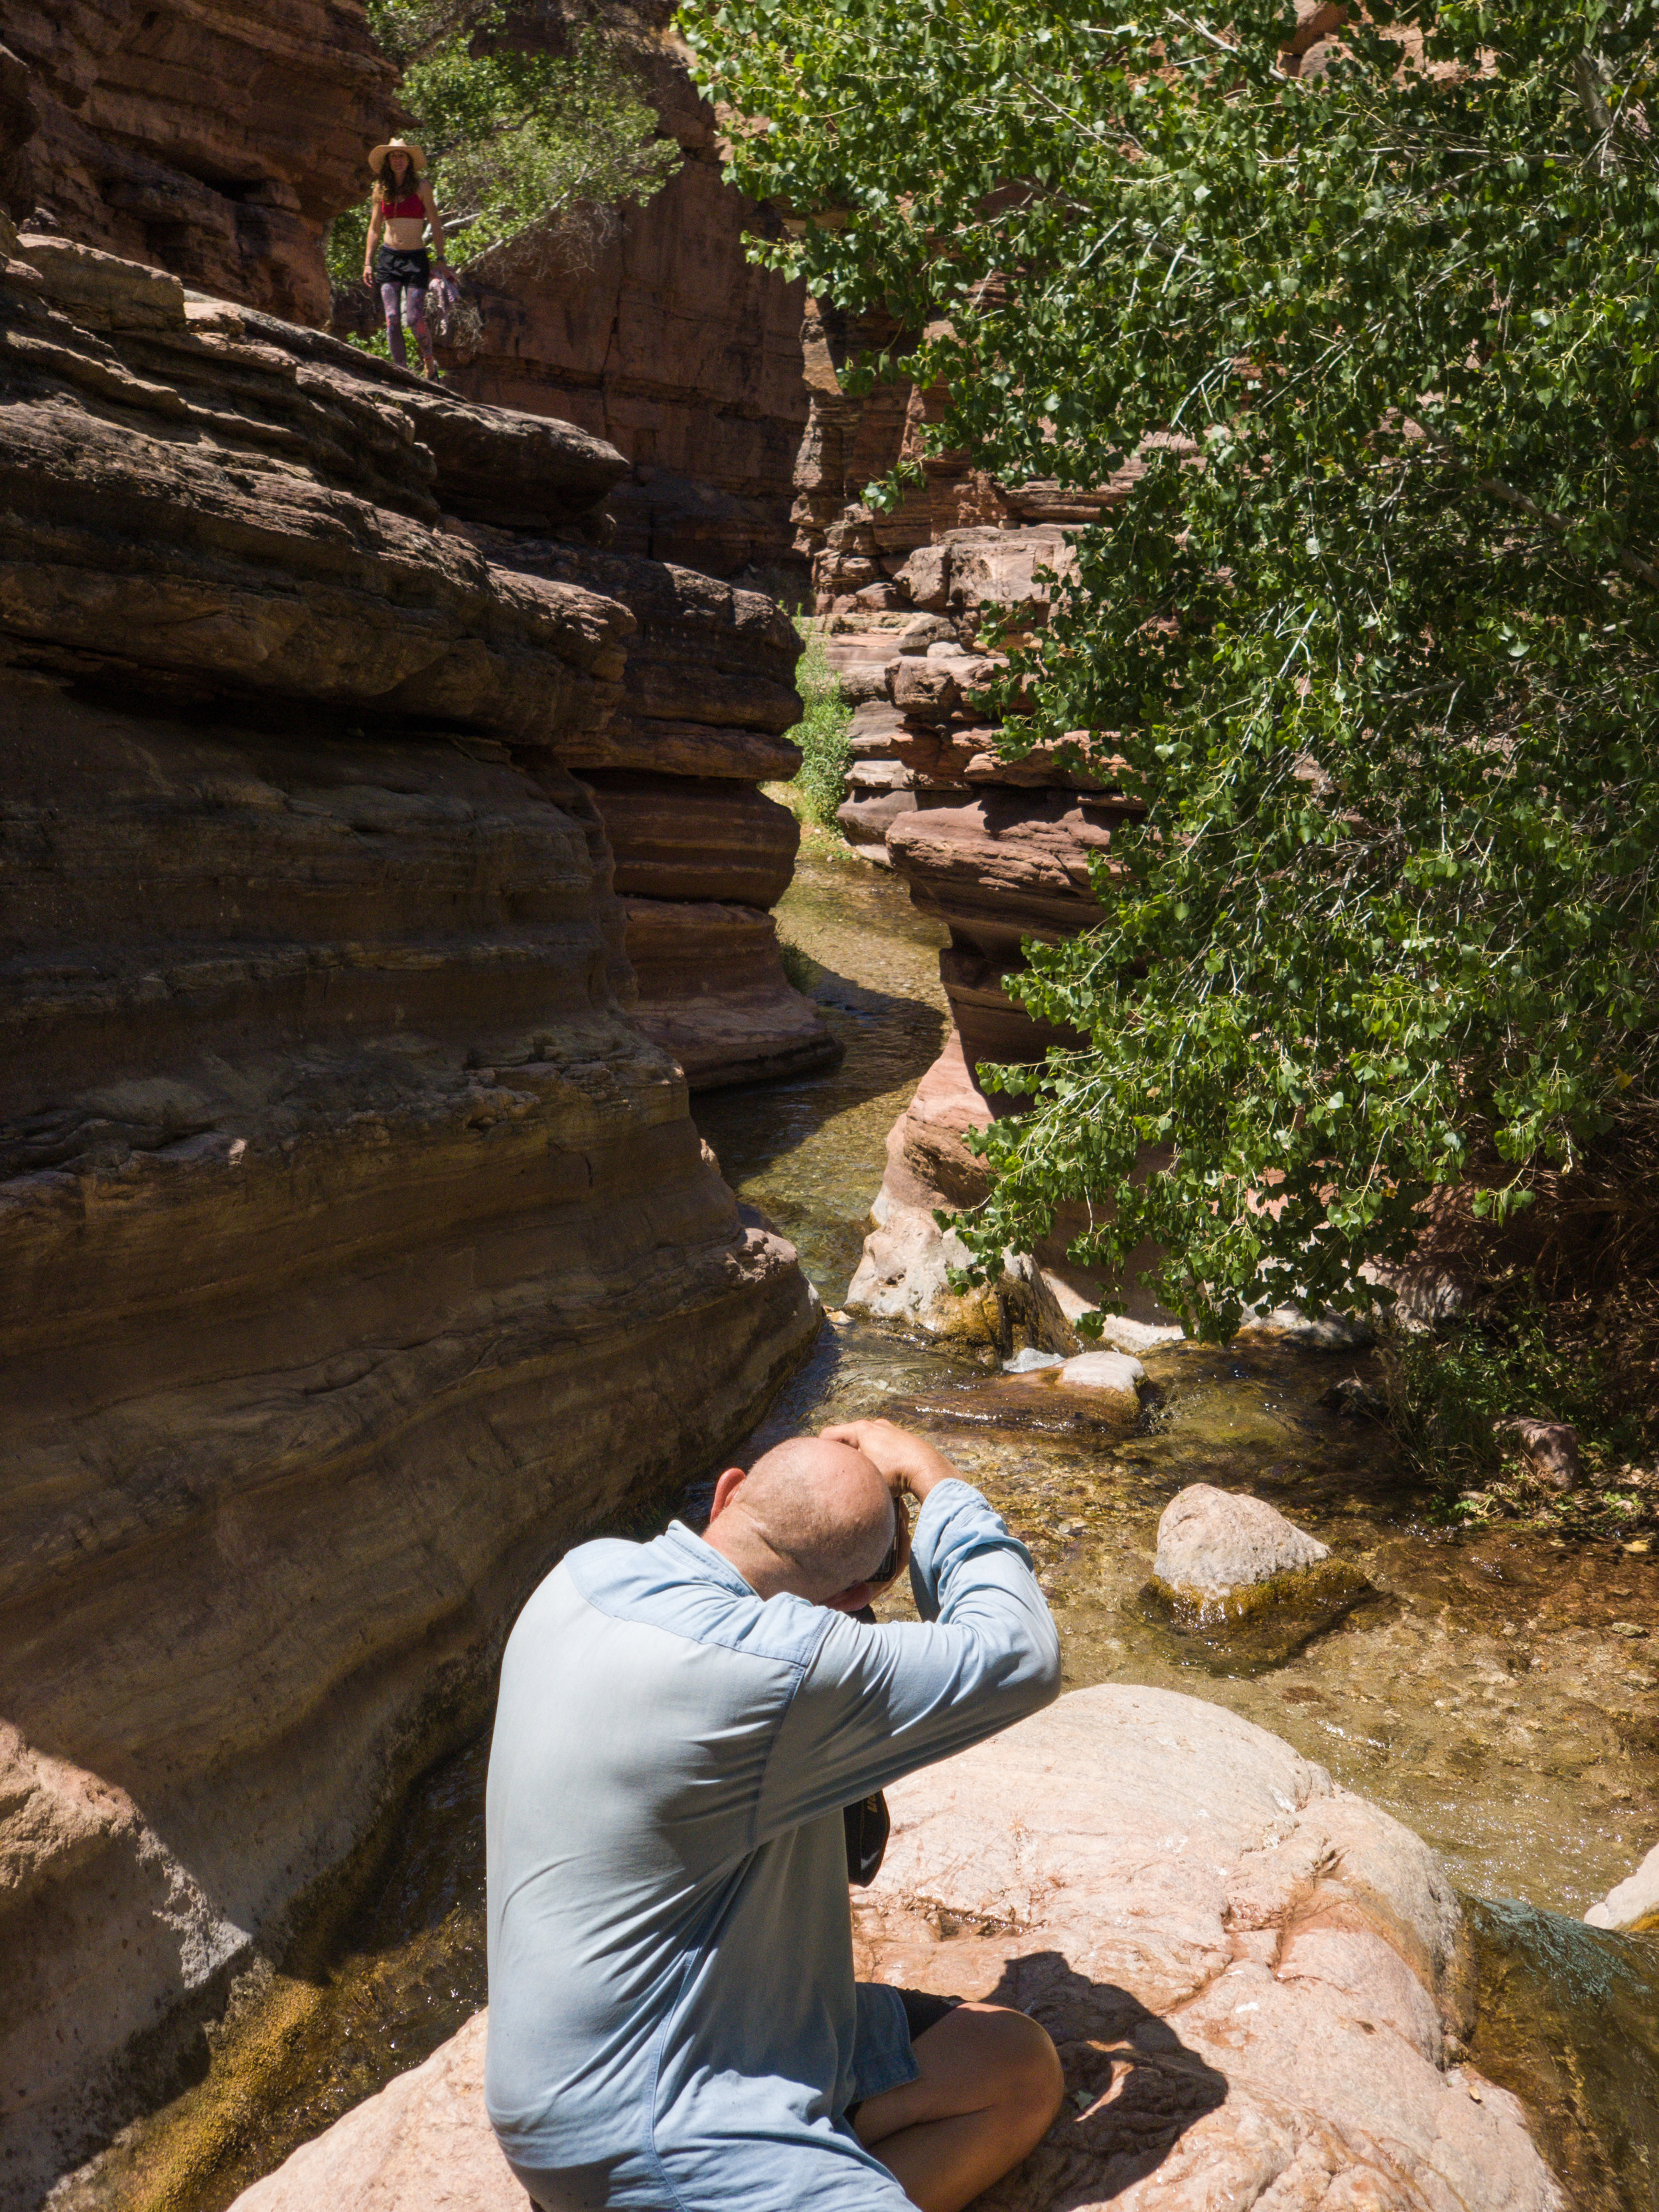  Dave taking a photo of the creek, Mariah on the ledge above. Not photoshopped. The canyon is huge. 